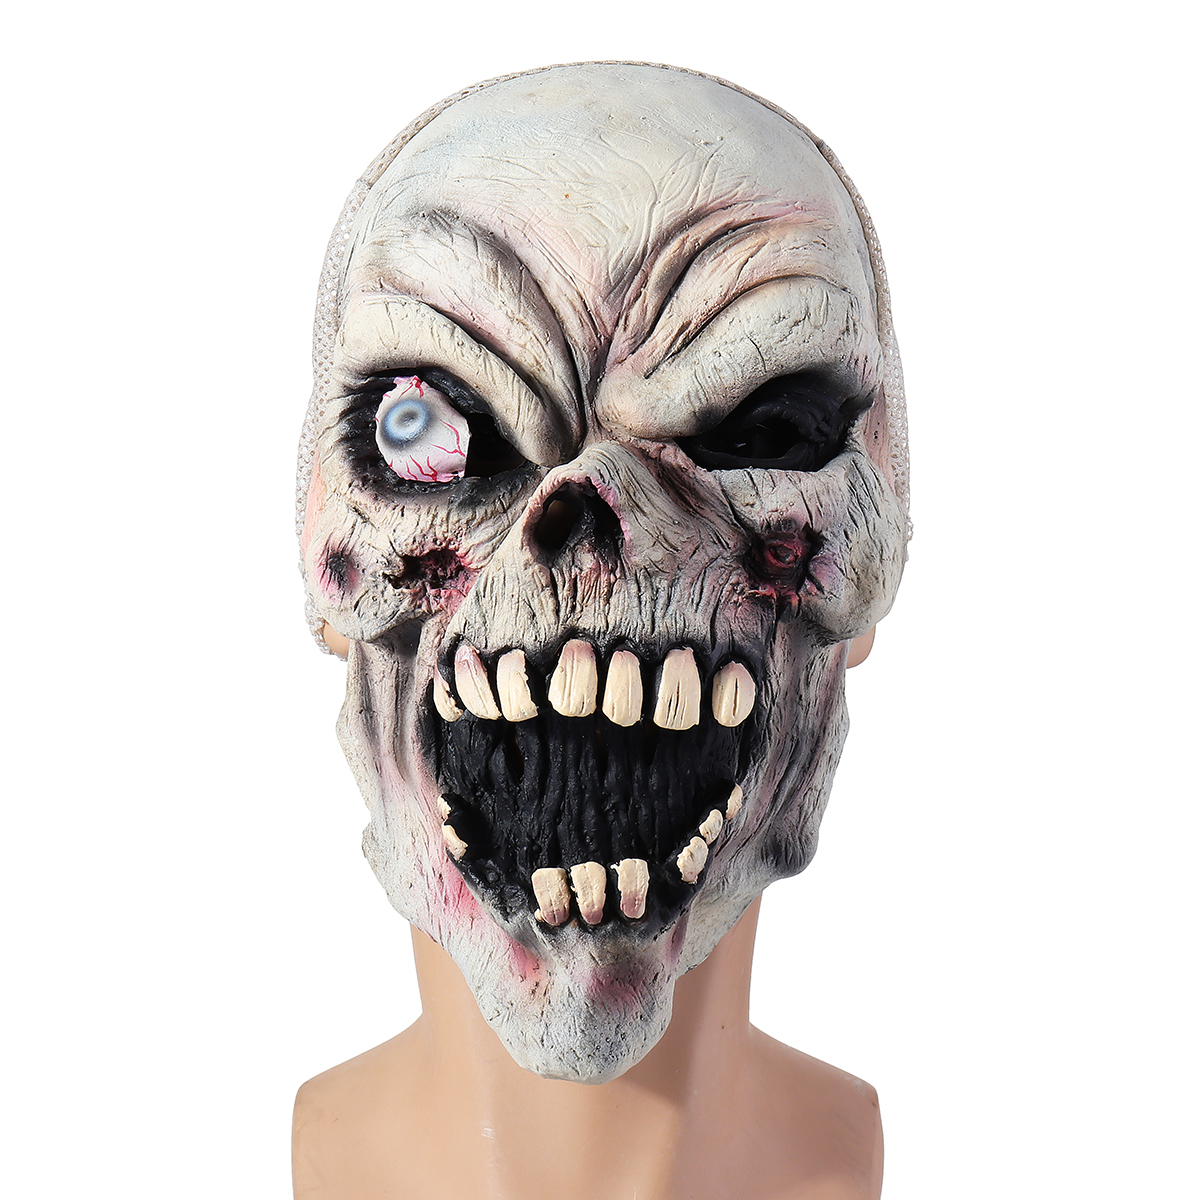 

Halloween Mask Bloody Festival Skull Zombie Latex Cosplay Horror Costume Props